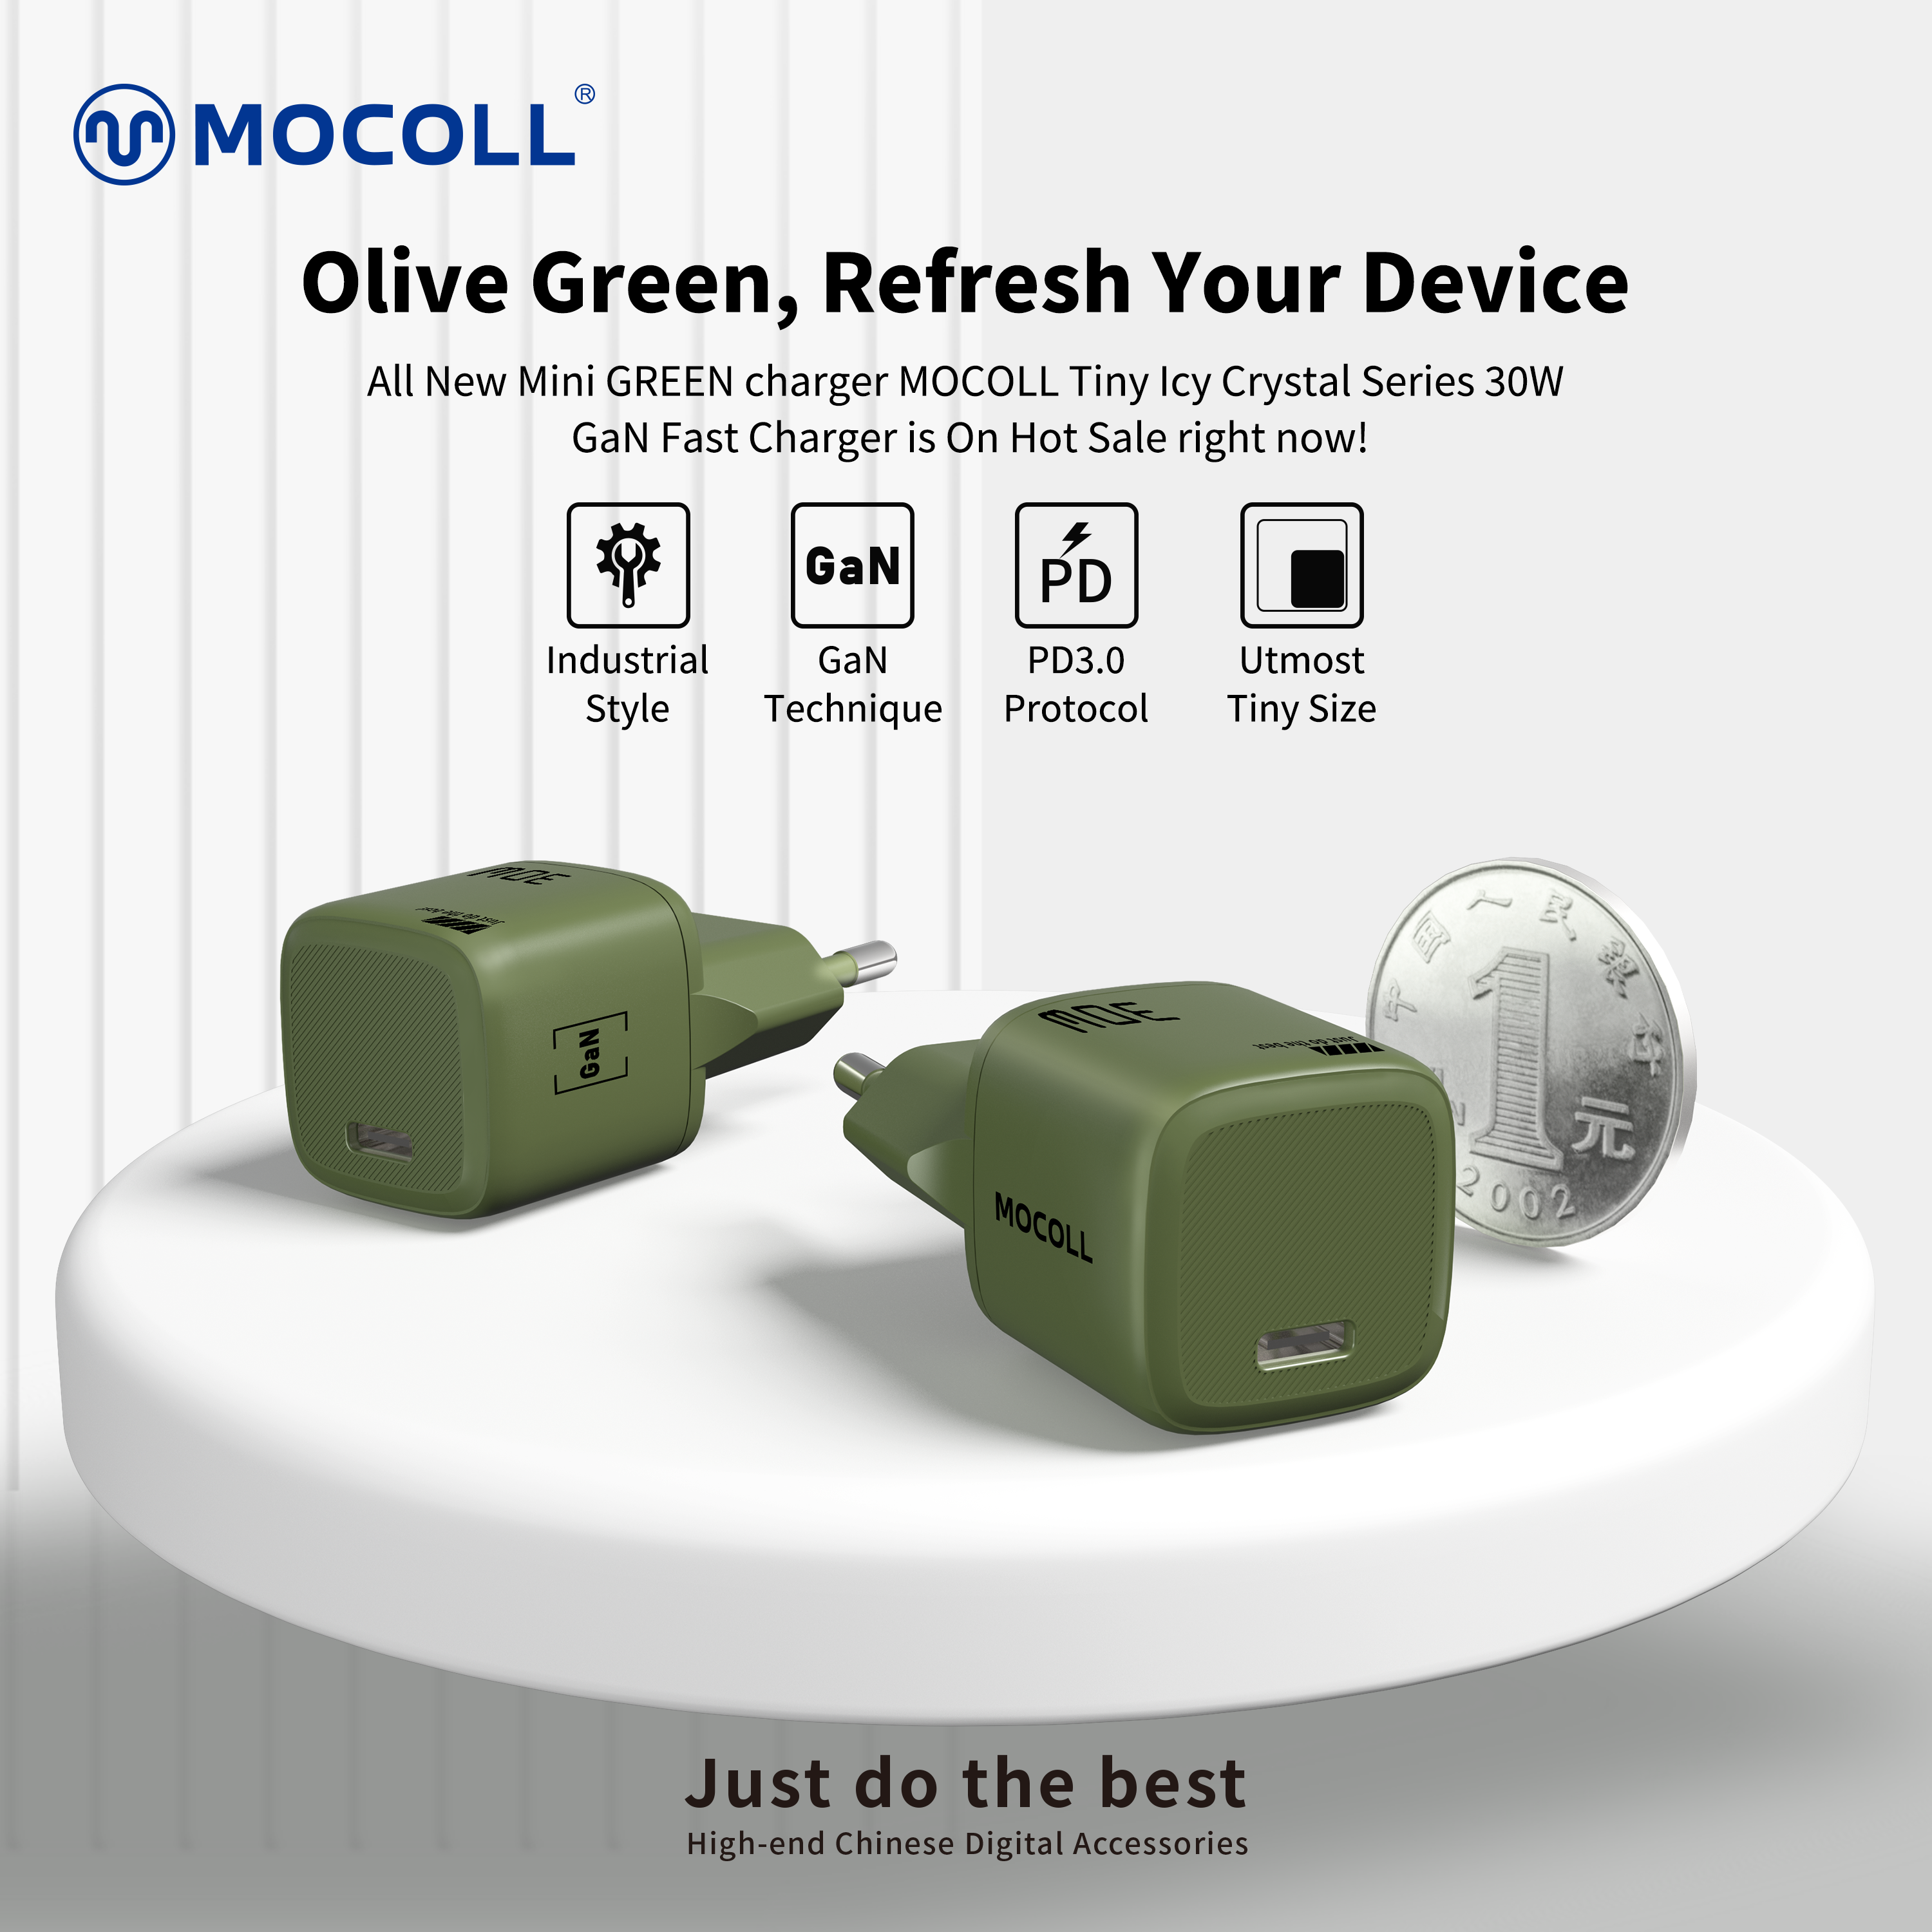 To Green | Industrial Style, MOCOLL New Olive Green GaN 30W Fast Charger